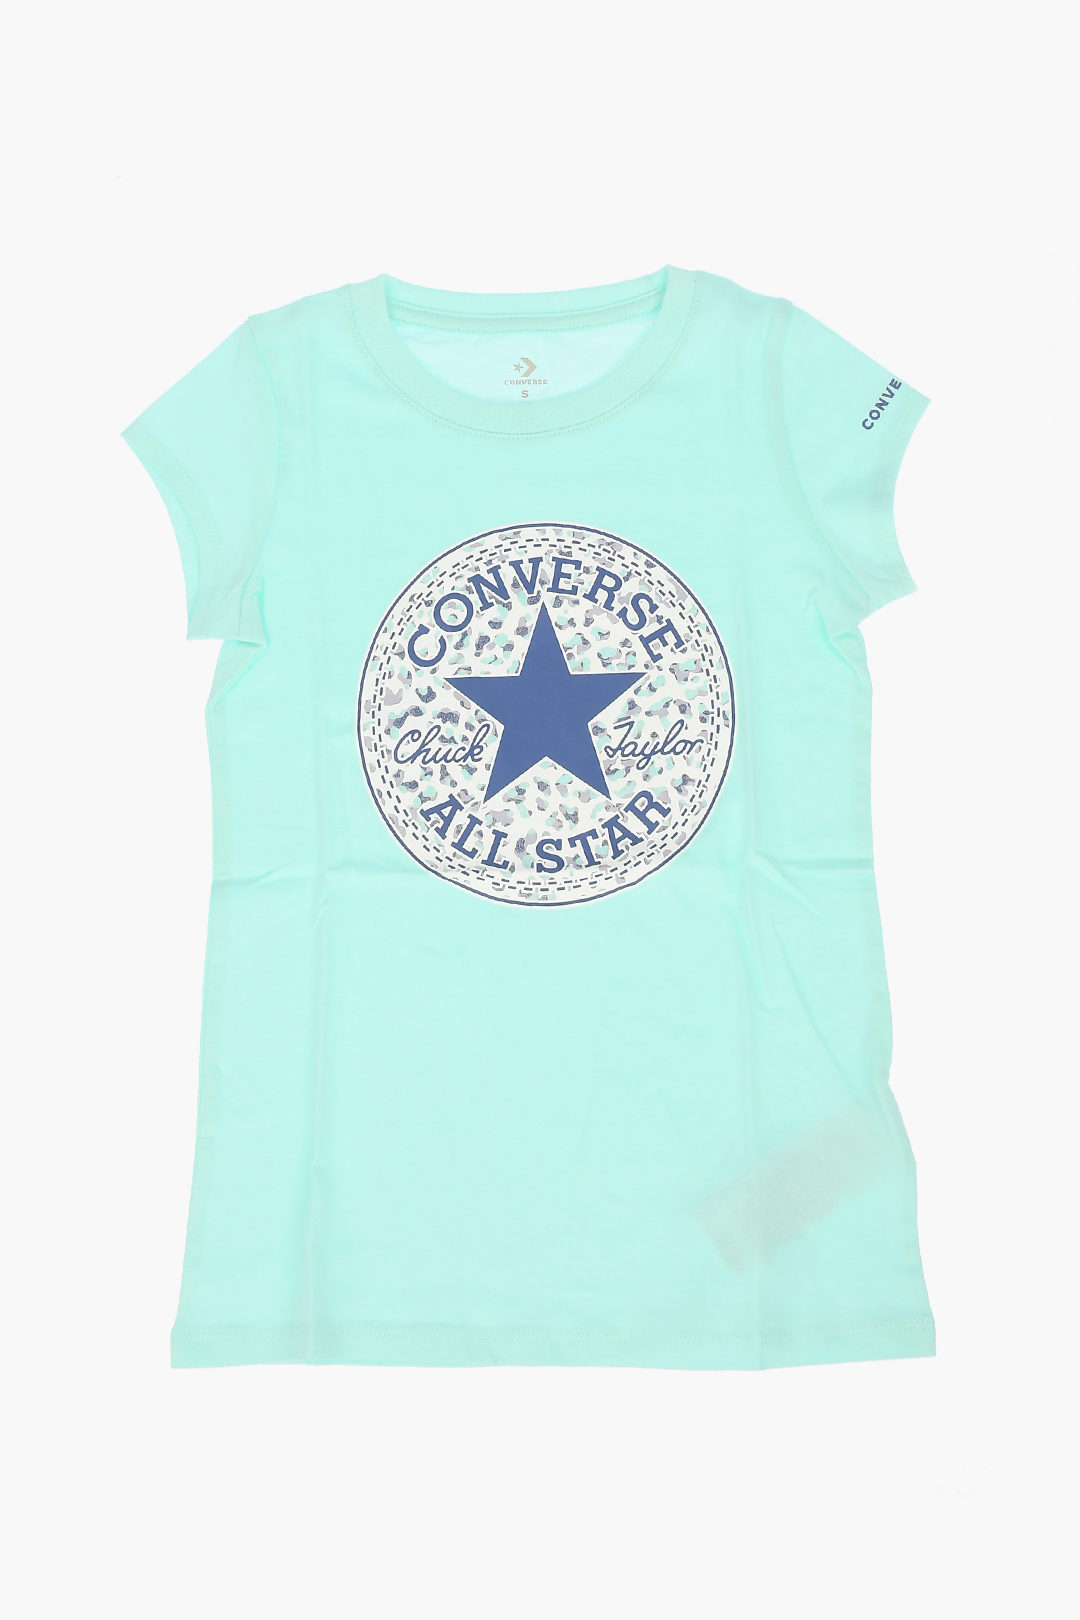 Converse KIDS ALL STAR CHUCK TAYLOR Printed T-shirt girls - Glamood Outlet